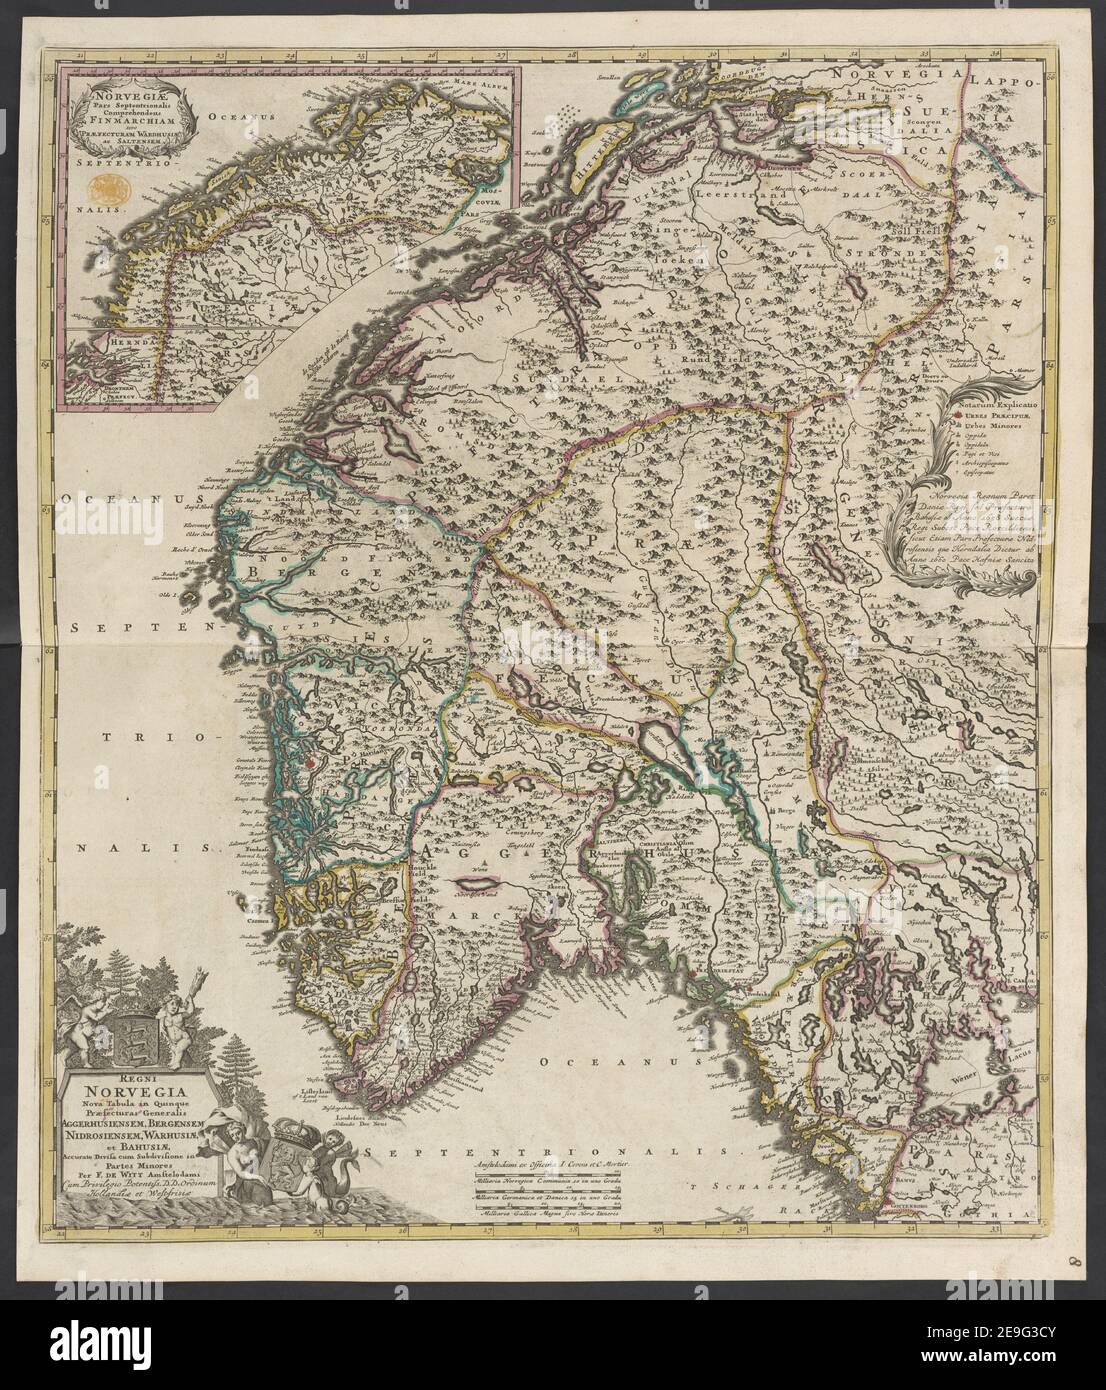 Regni Norvegia  Author  Wit, Frederik de 111.76. Place of publication: Amstelodami Publisher: ex Officina I. Covens et C. Mortier., Date of publication: [1720 c.]  Item type: 1 map Medium: copperplate engraving Dimensions: 56.8 X 48.8 cm  Former owner: George III, King of Great Britain, 1738-1820 Stock Photo